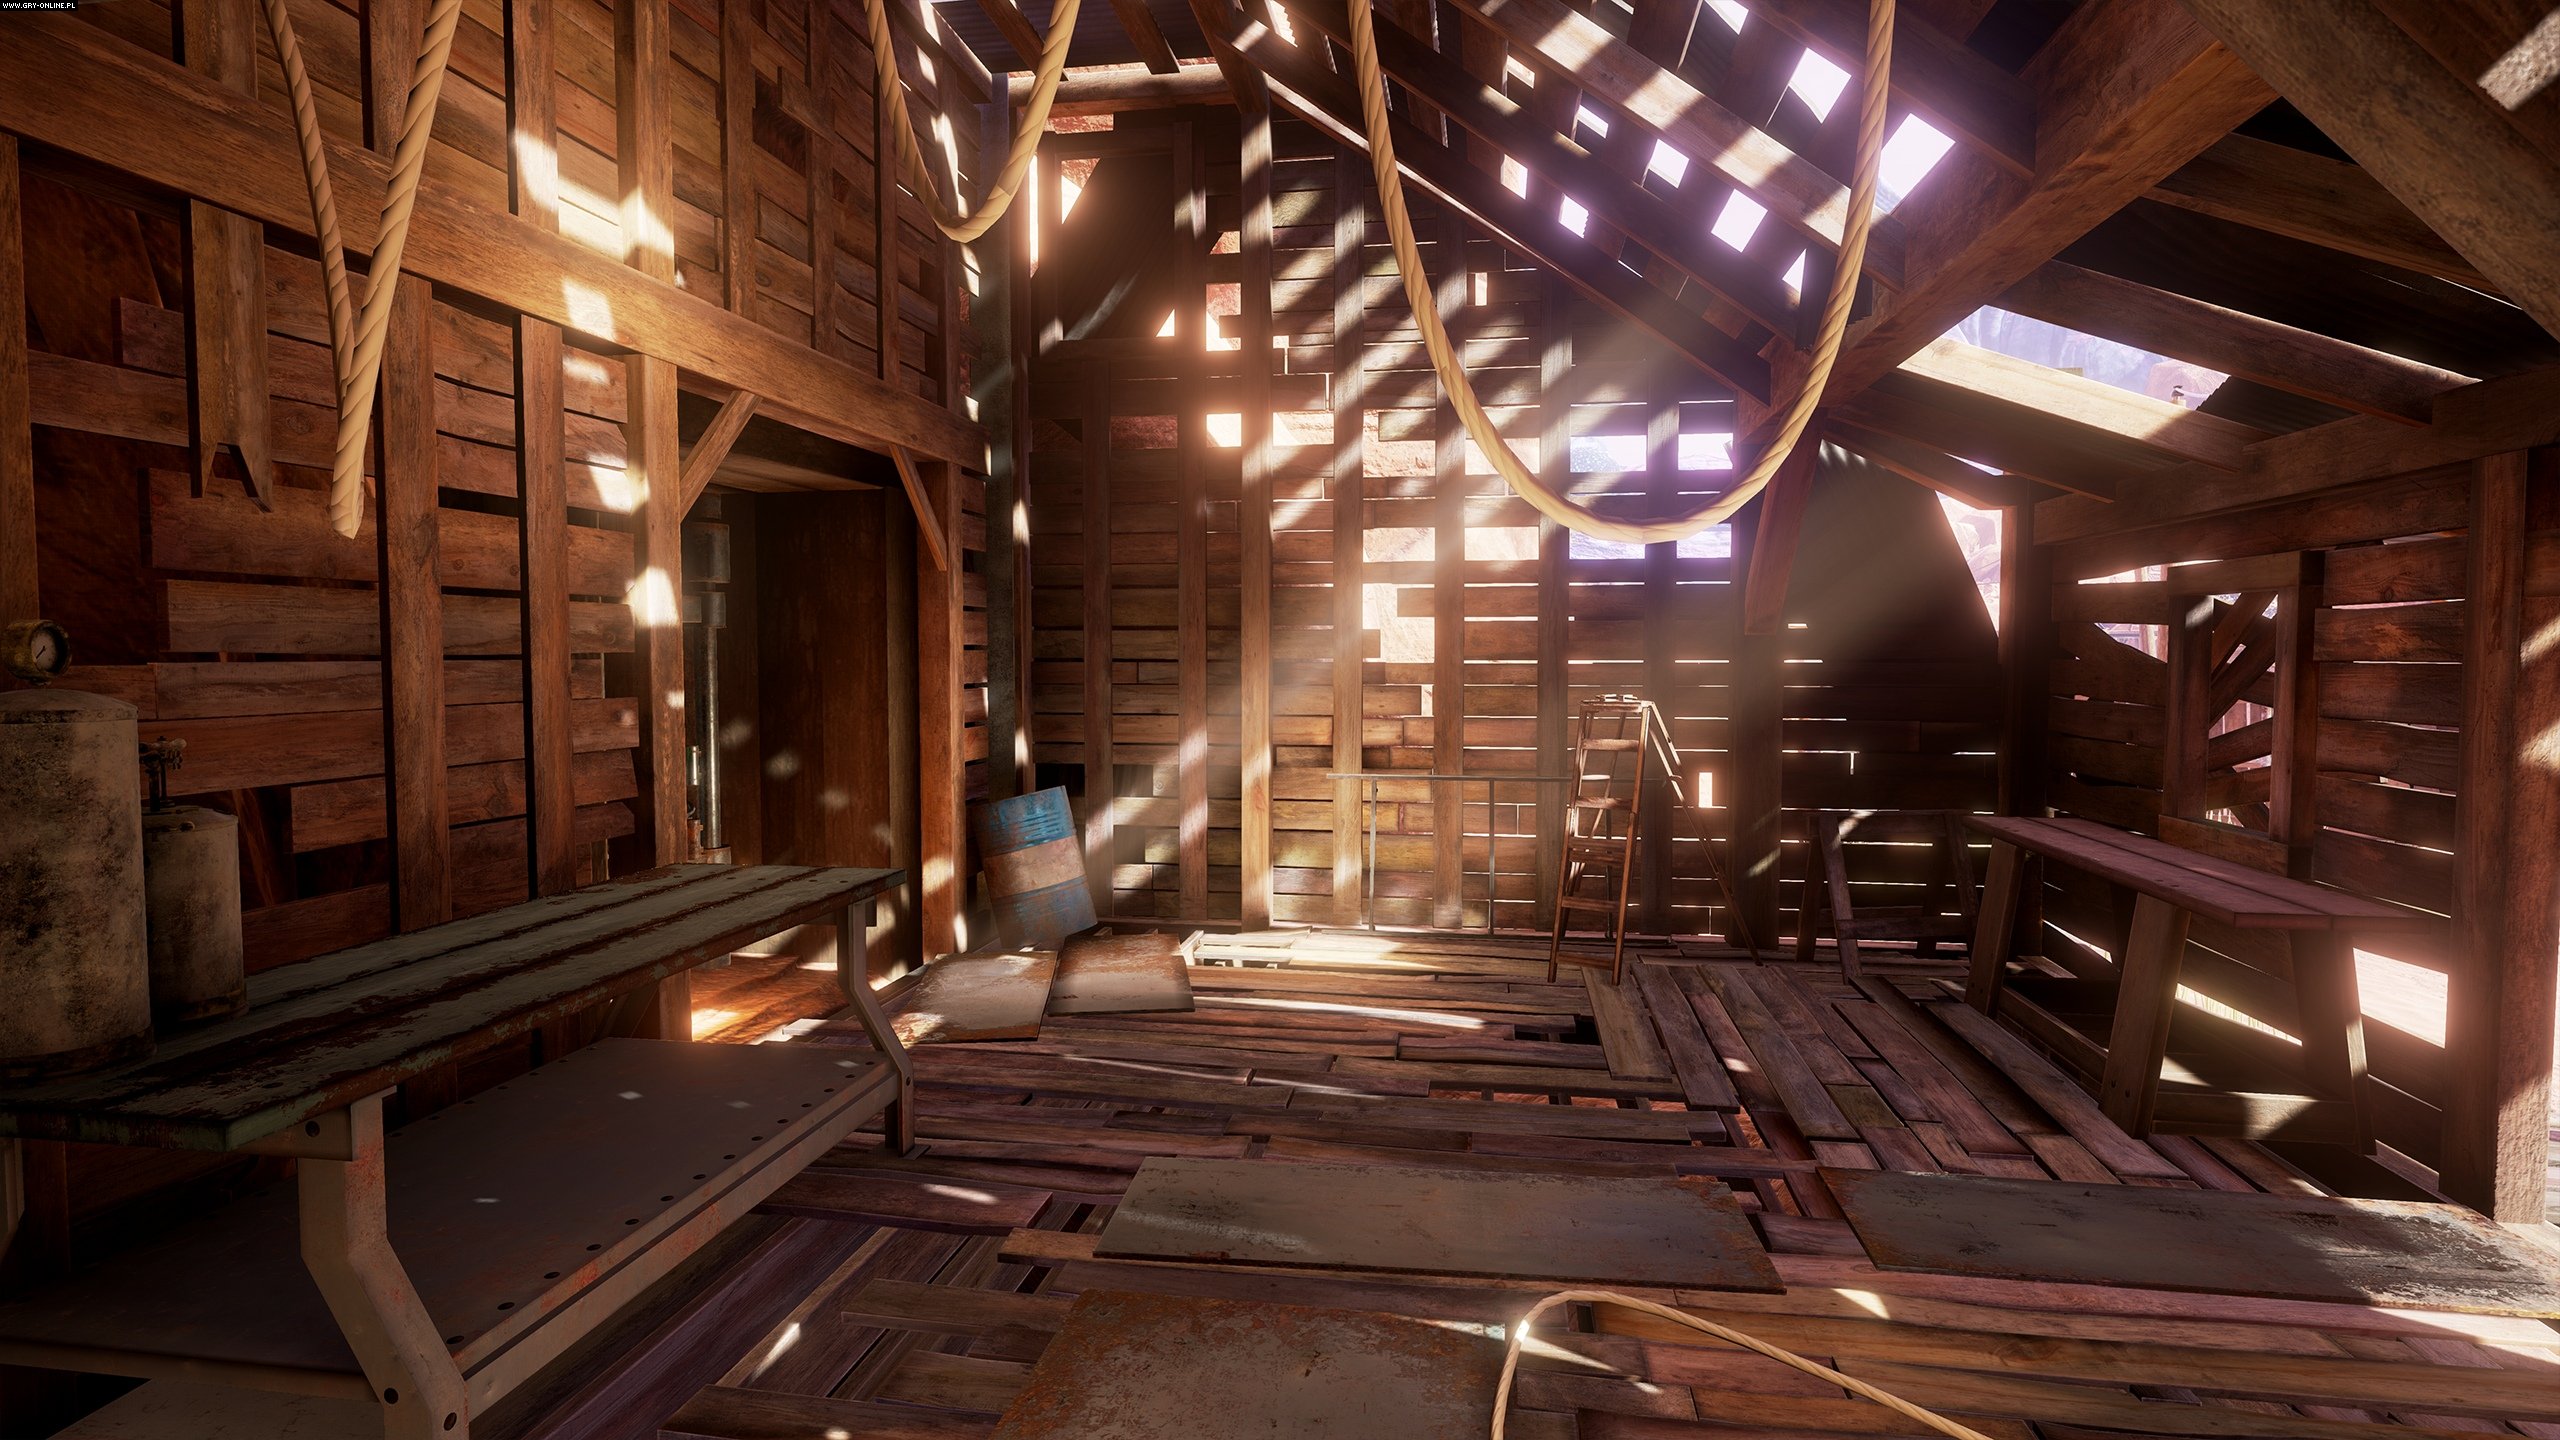 cyan obduction download free